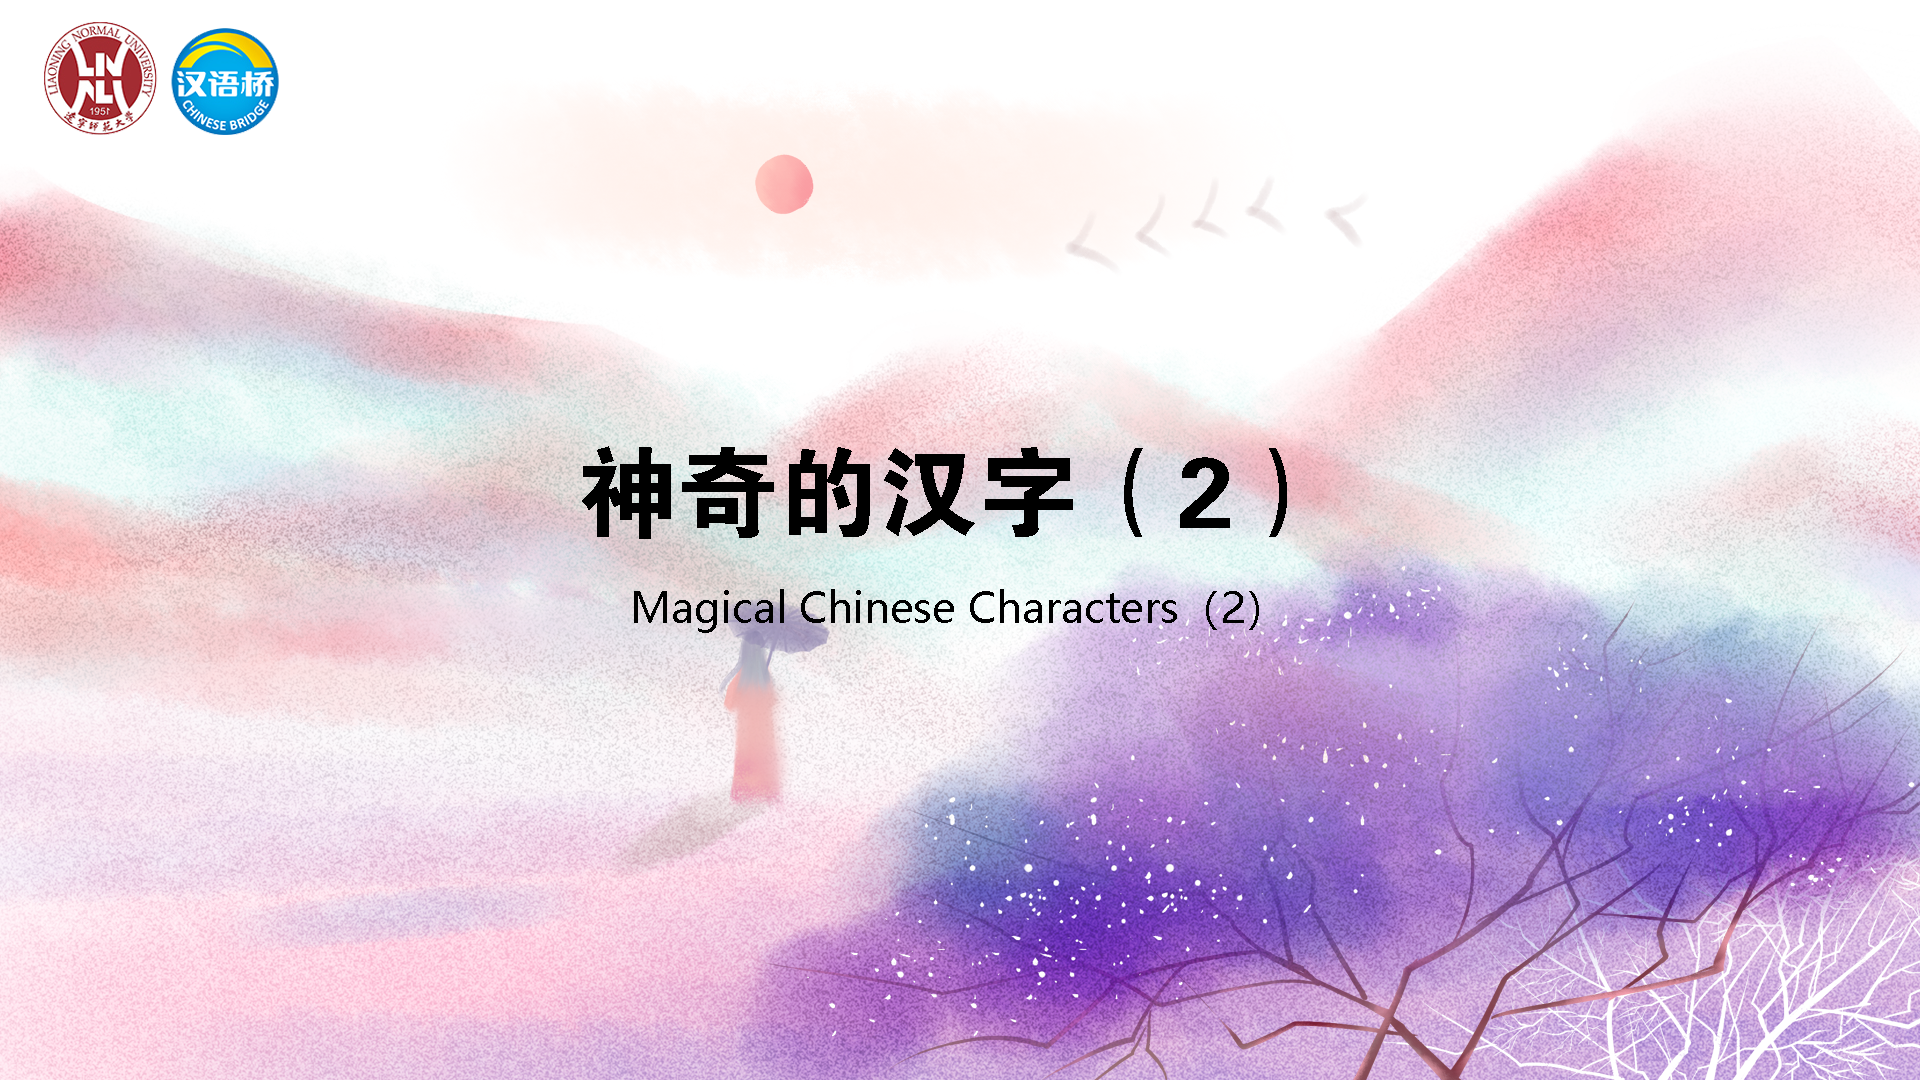 Magical Chinese Characters 02